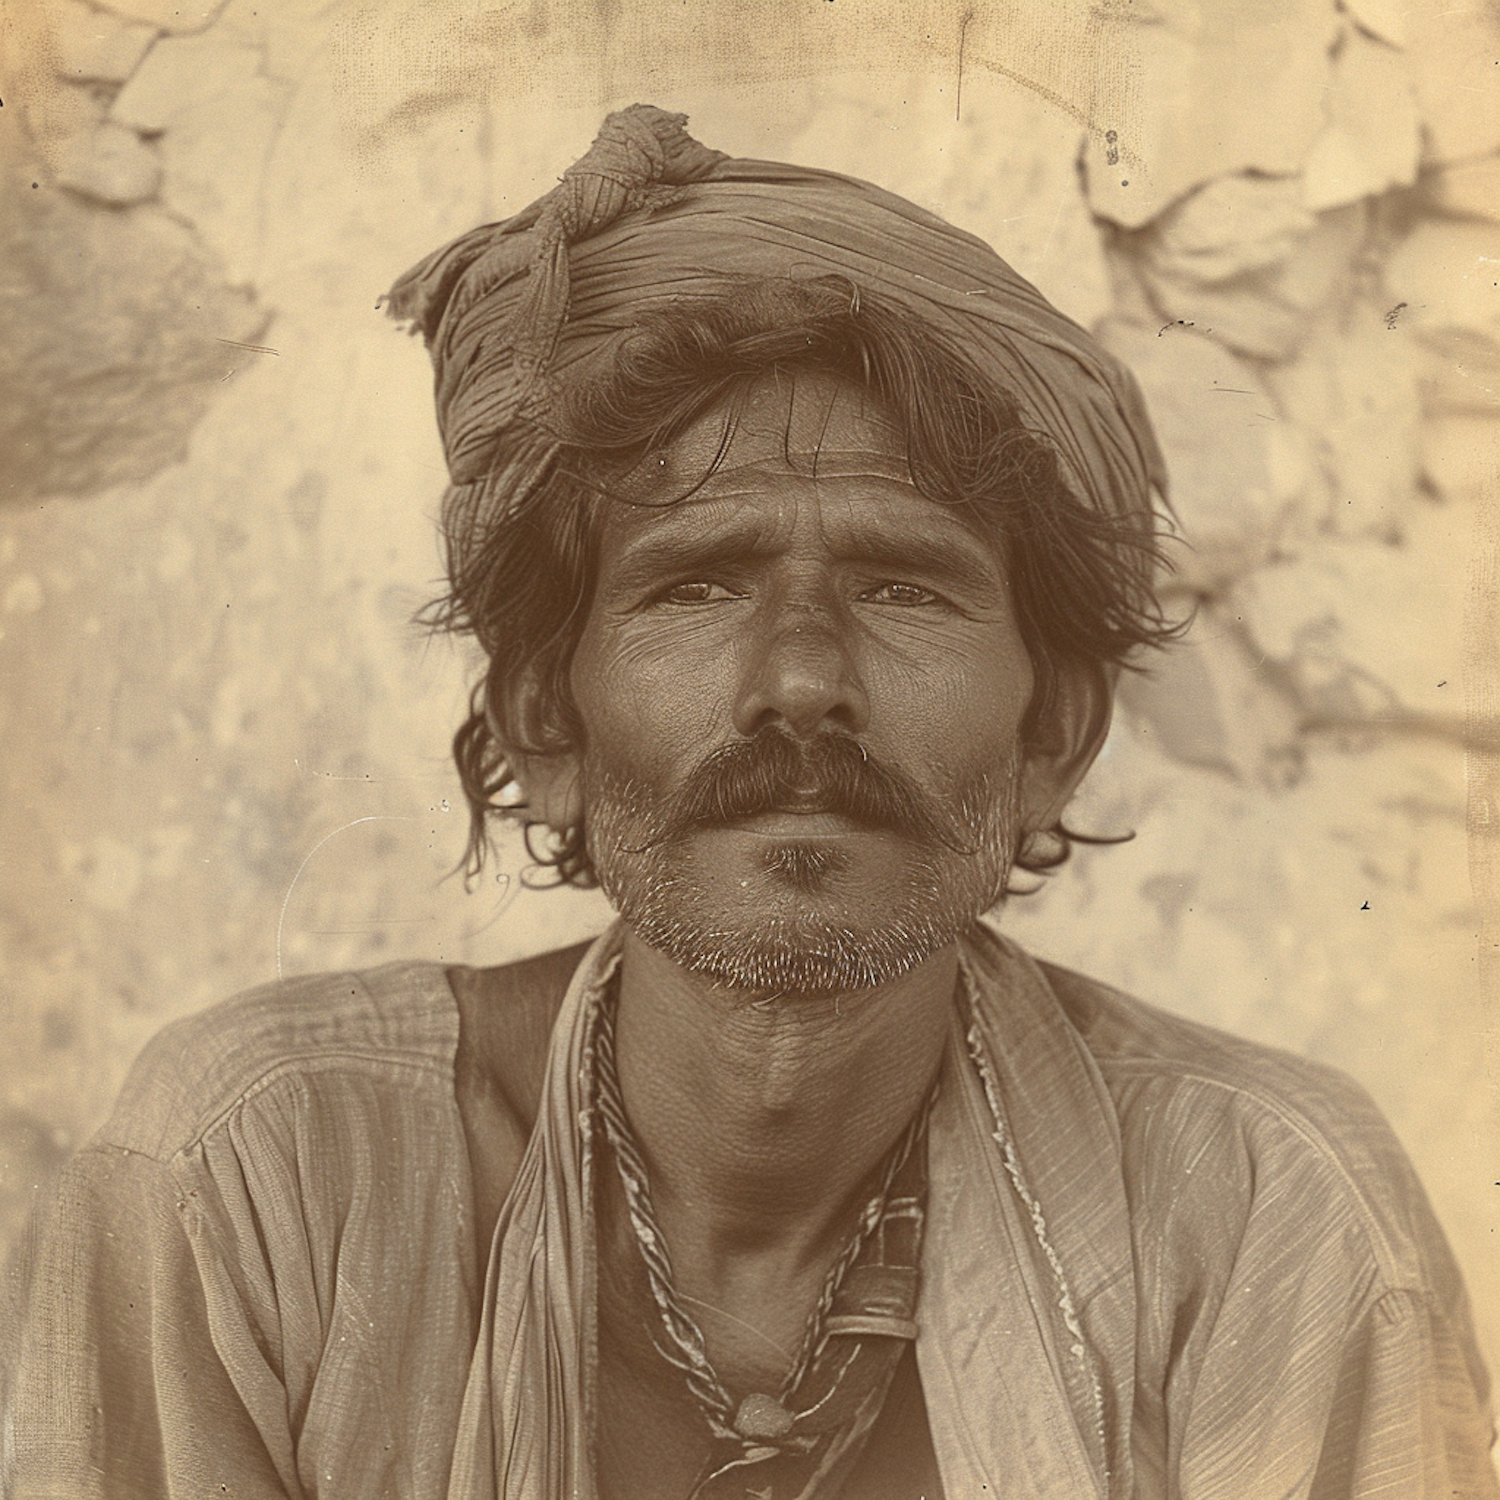 Portrait of a Weathered Man with Turban